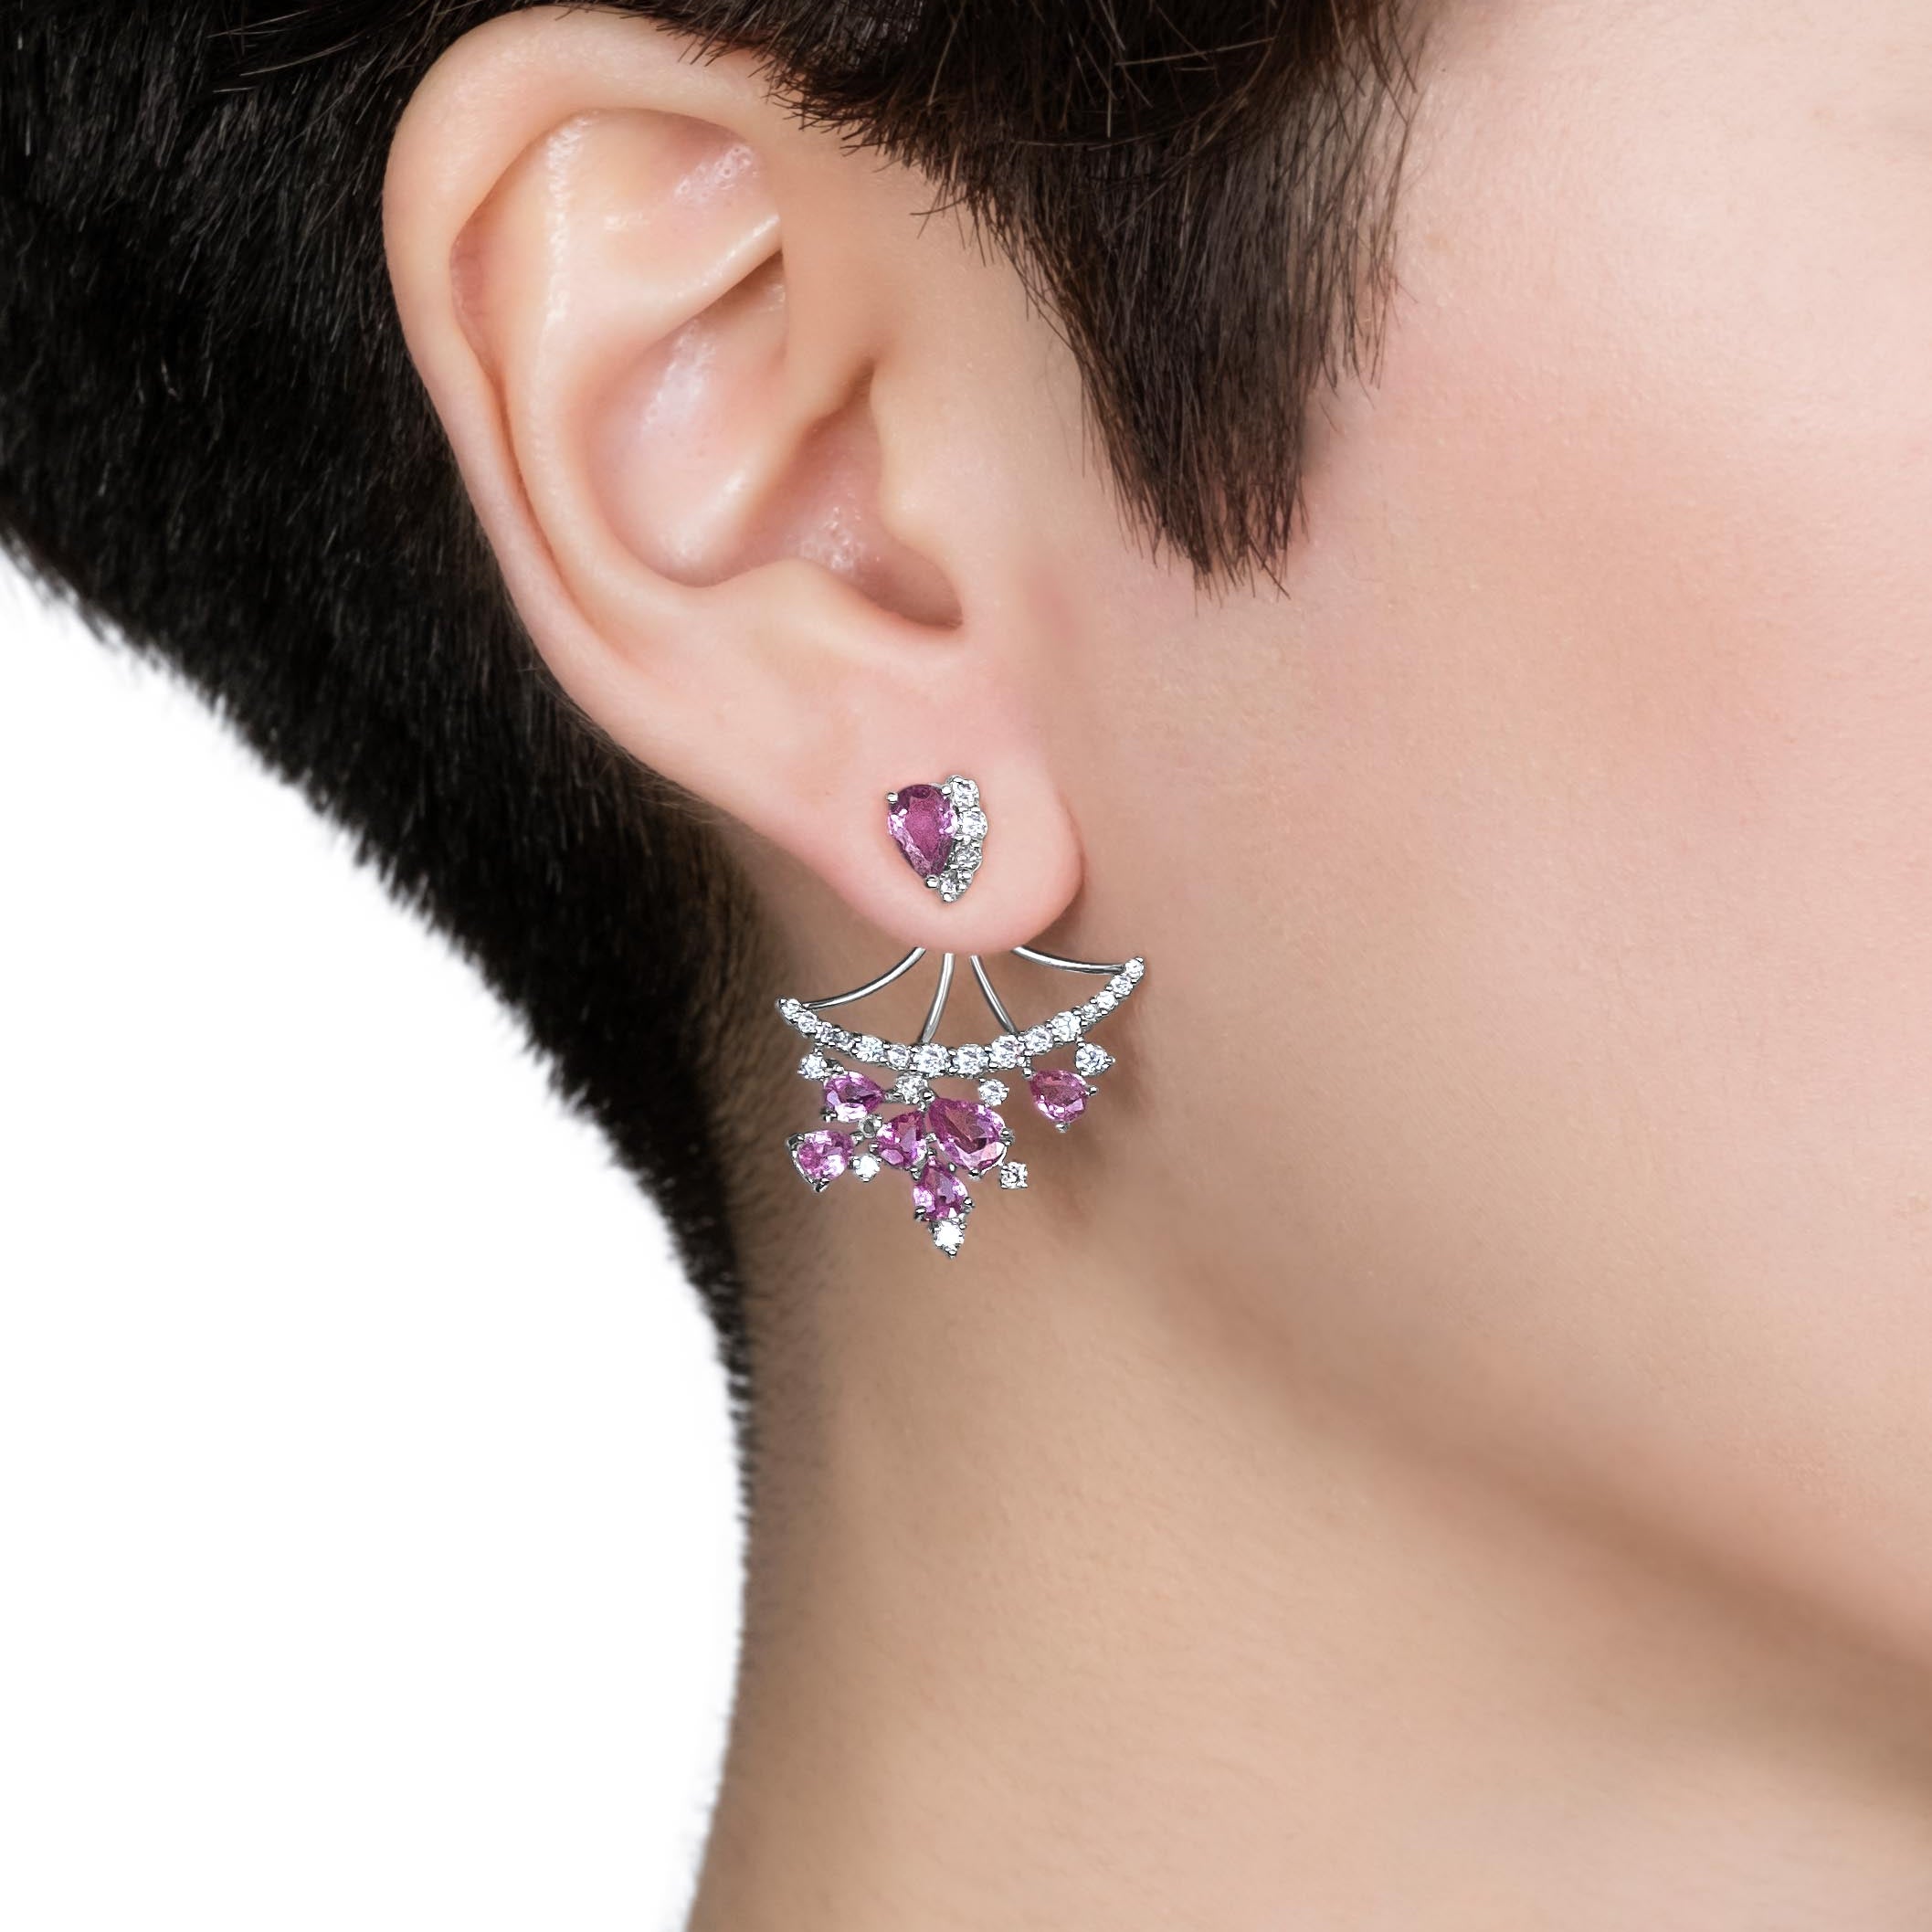 White Gold Earrings with Pink Sapphires and Diamonds, Large - Model shot